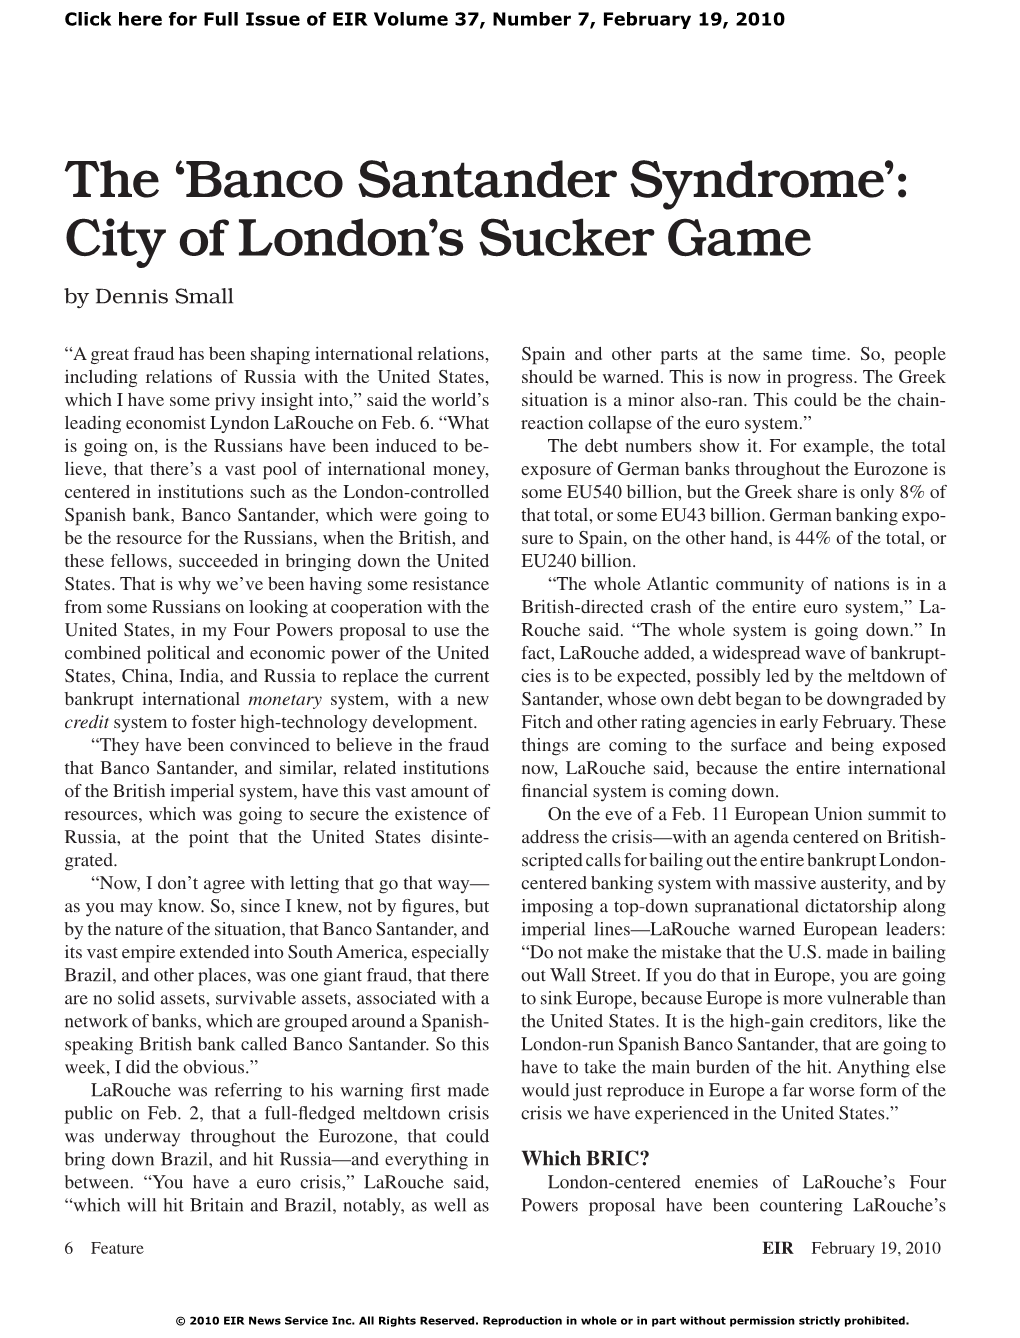 The 'Banco Santander Syndrome': City of London's Sucker Game